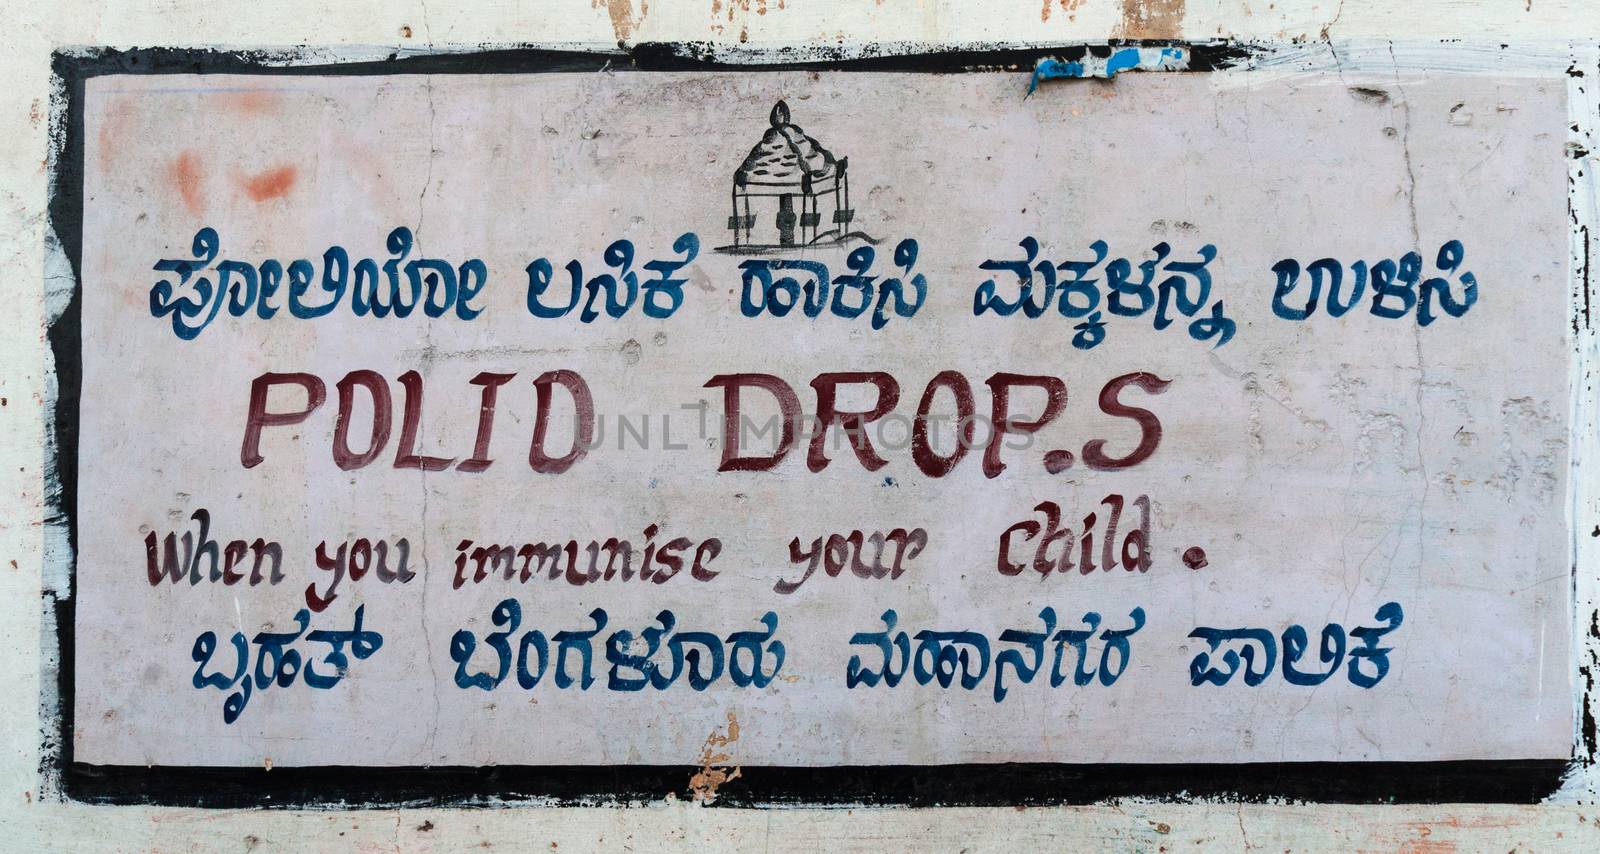 Street sign in Bengaluru, India, partly written in Kannada and English.